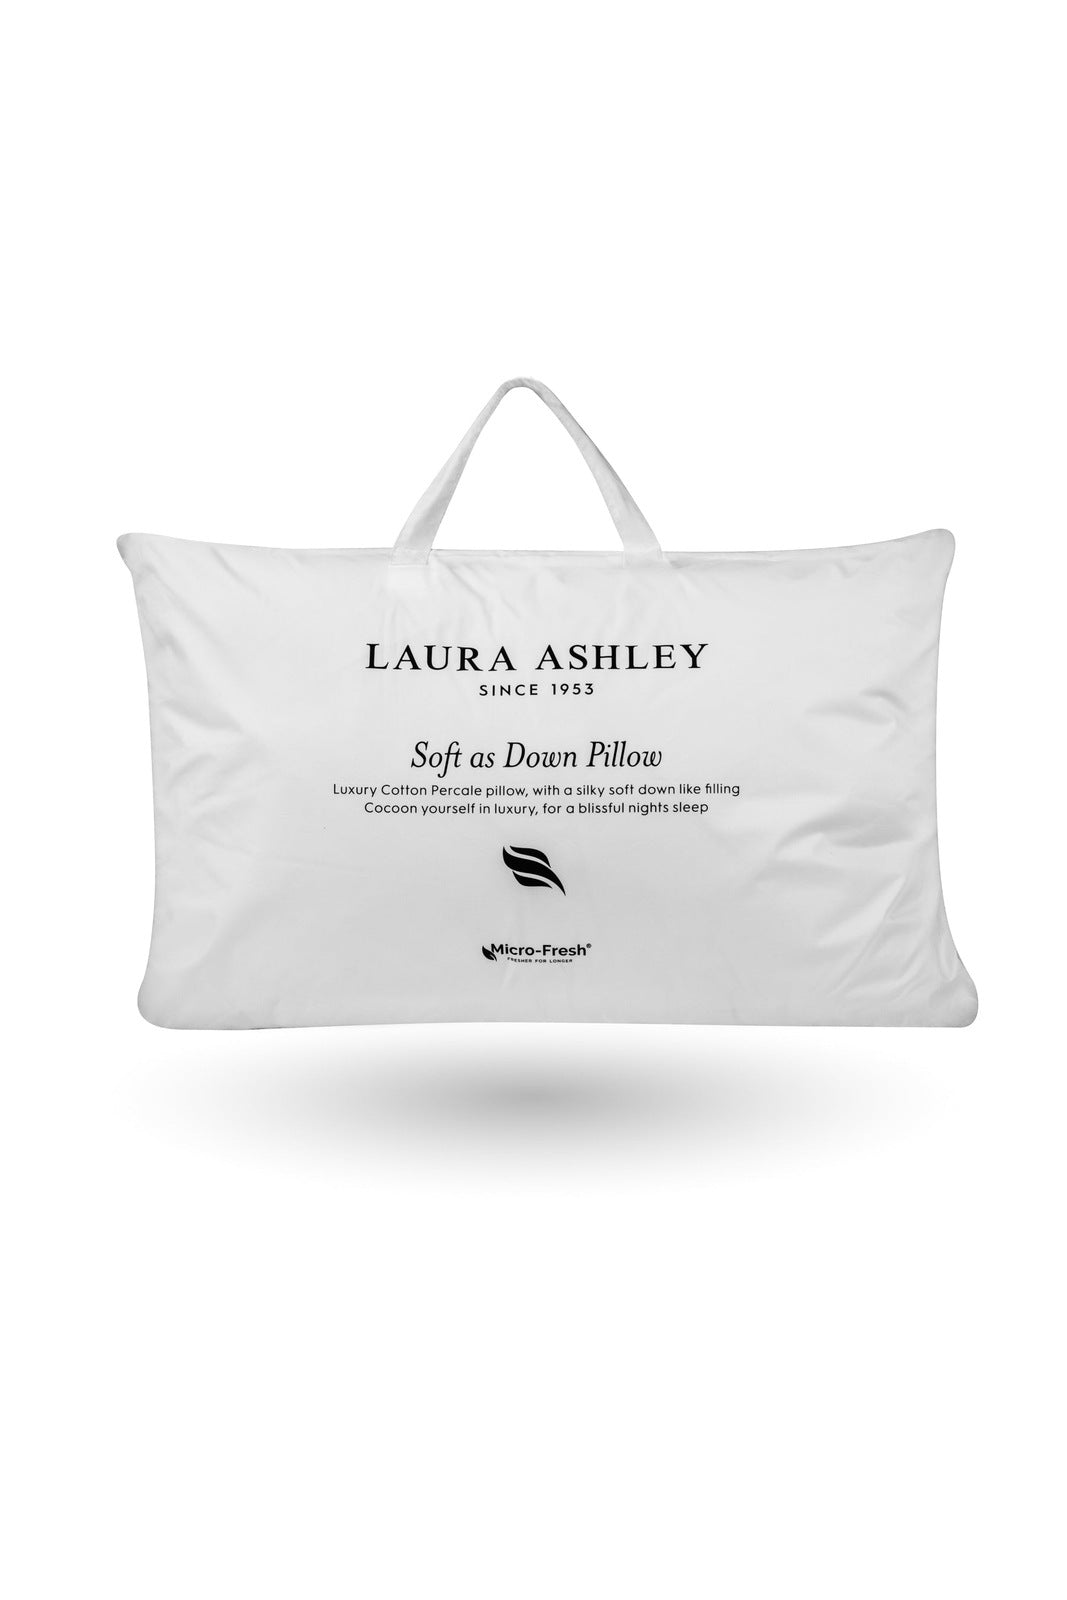 Laura Ashley Soft As Down Pillow 1 Shaws Department Stores